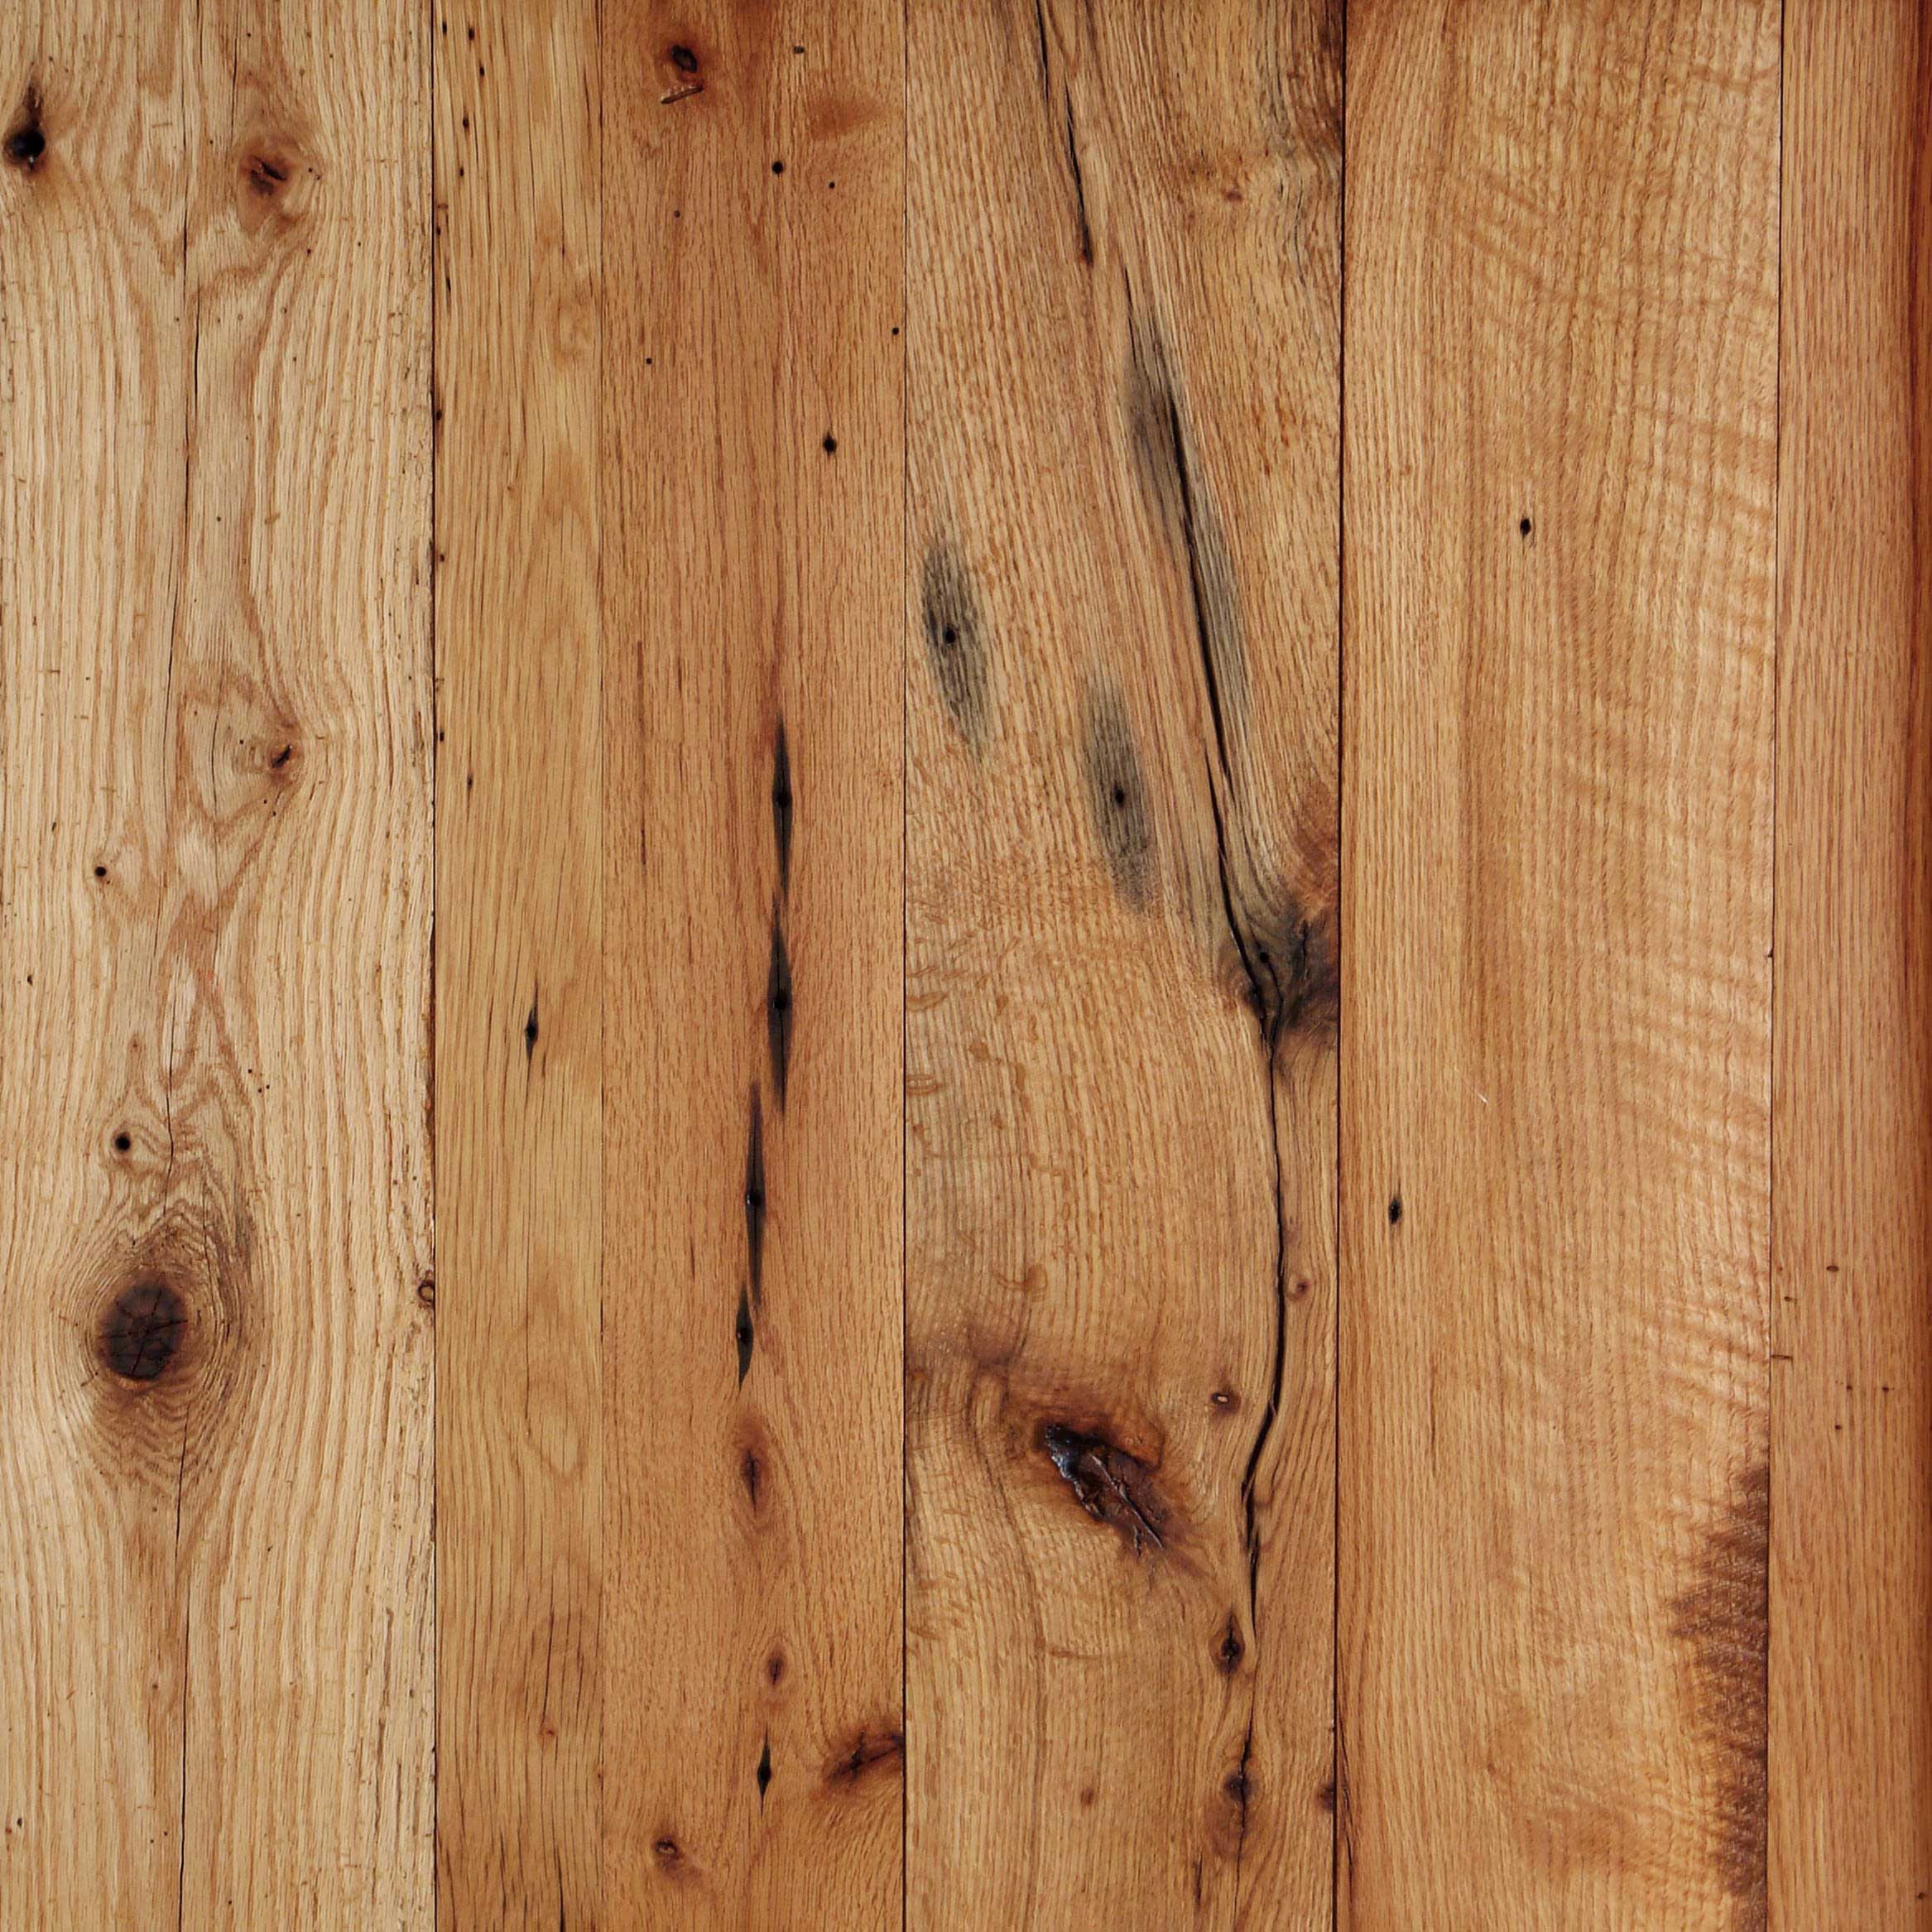 21 Unique 3 4 Inch Maple Hardwood Flooring 2024 free download 3 4 inch maple hardwood flooring of longleaf lumber reclaimed red white oak wood intended for reclaimed salvaged antique red oak flooring wide boards knots